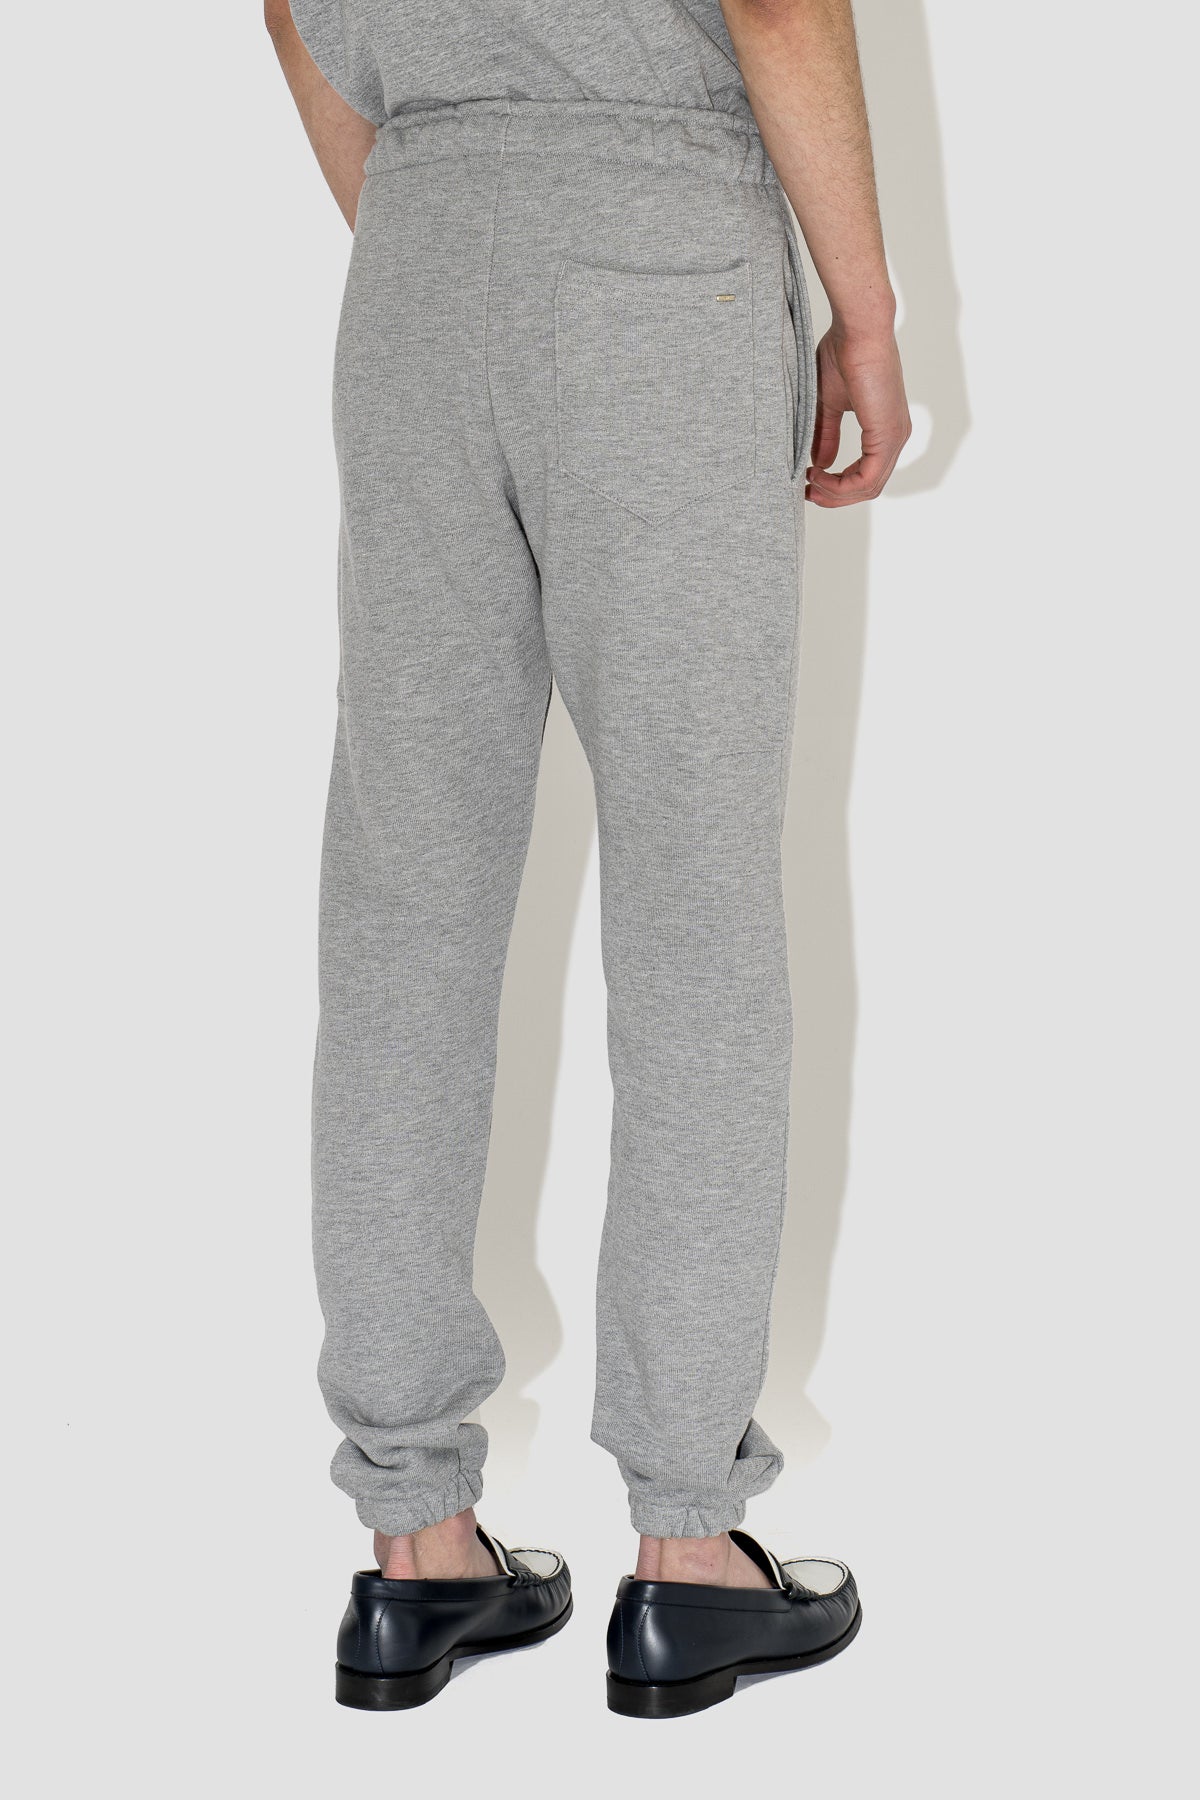 Embroidered Signature Sweatpants in Heather Grey